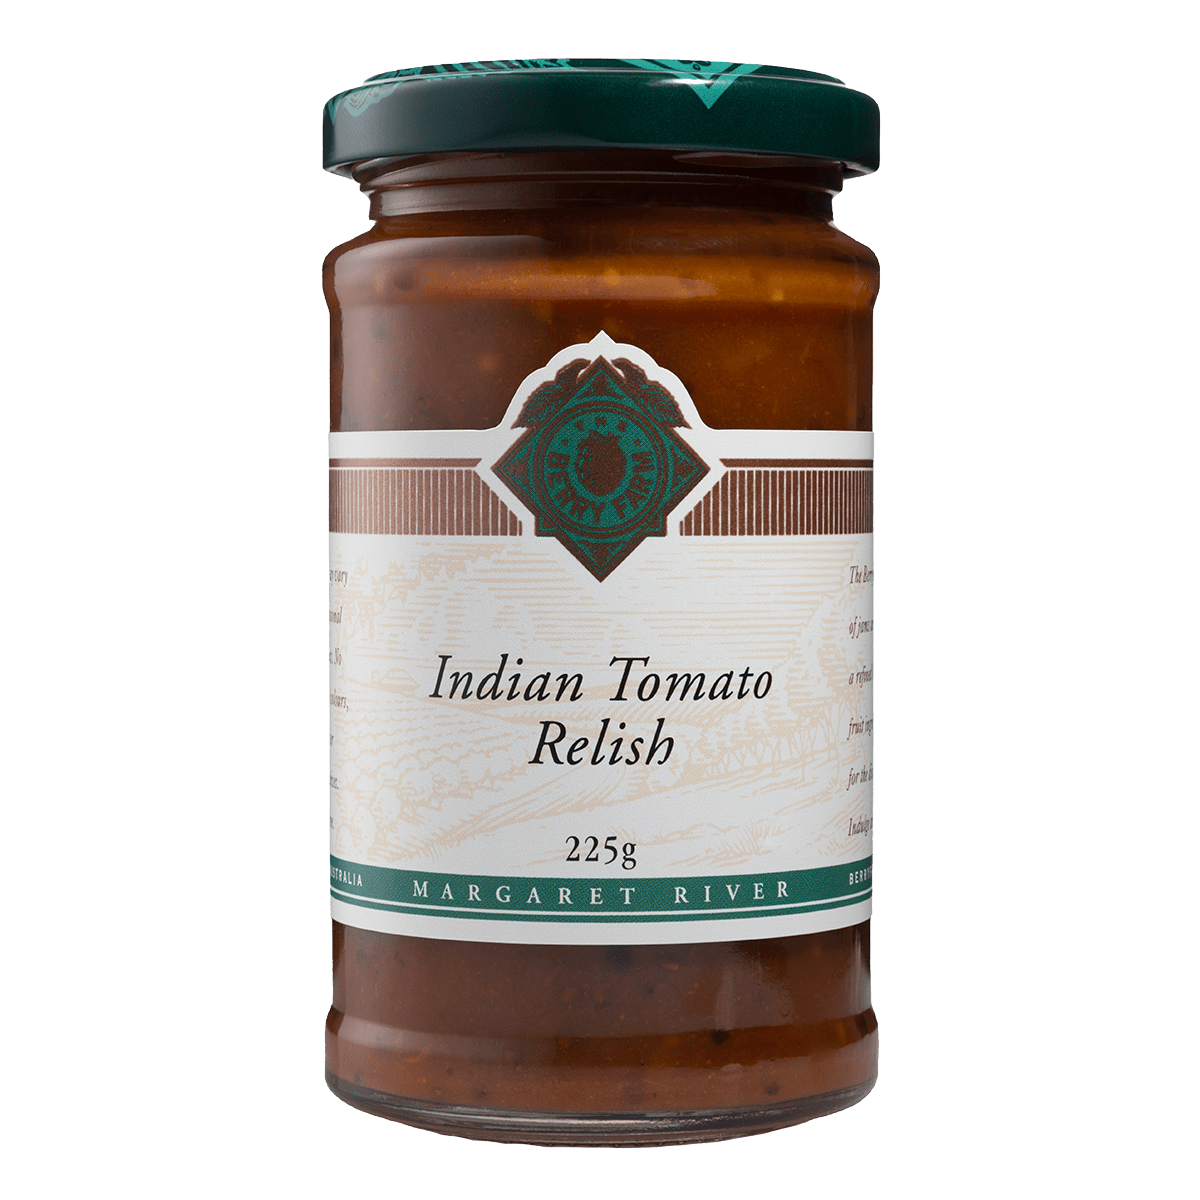 A jar of Indian Tomato Relish